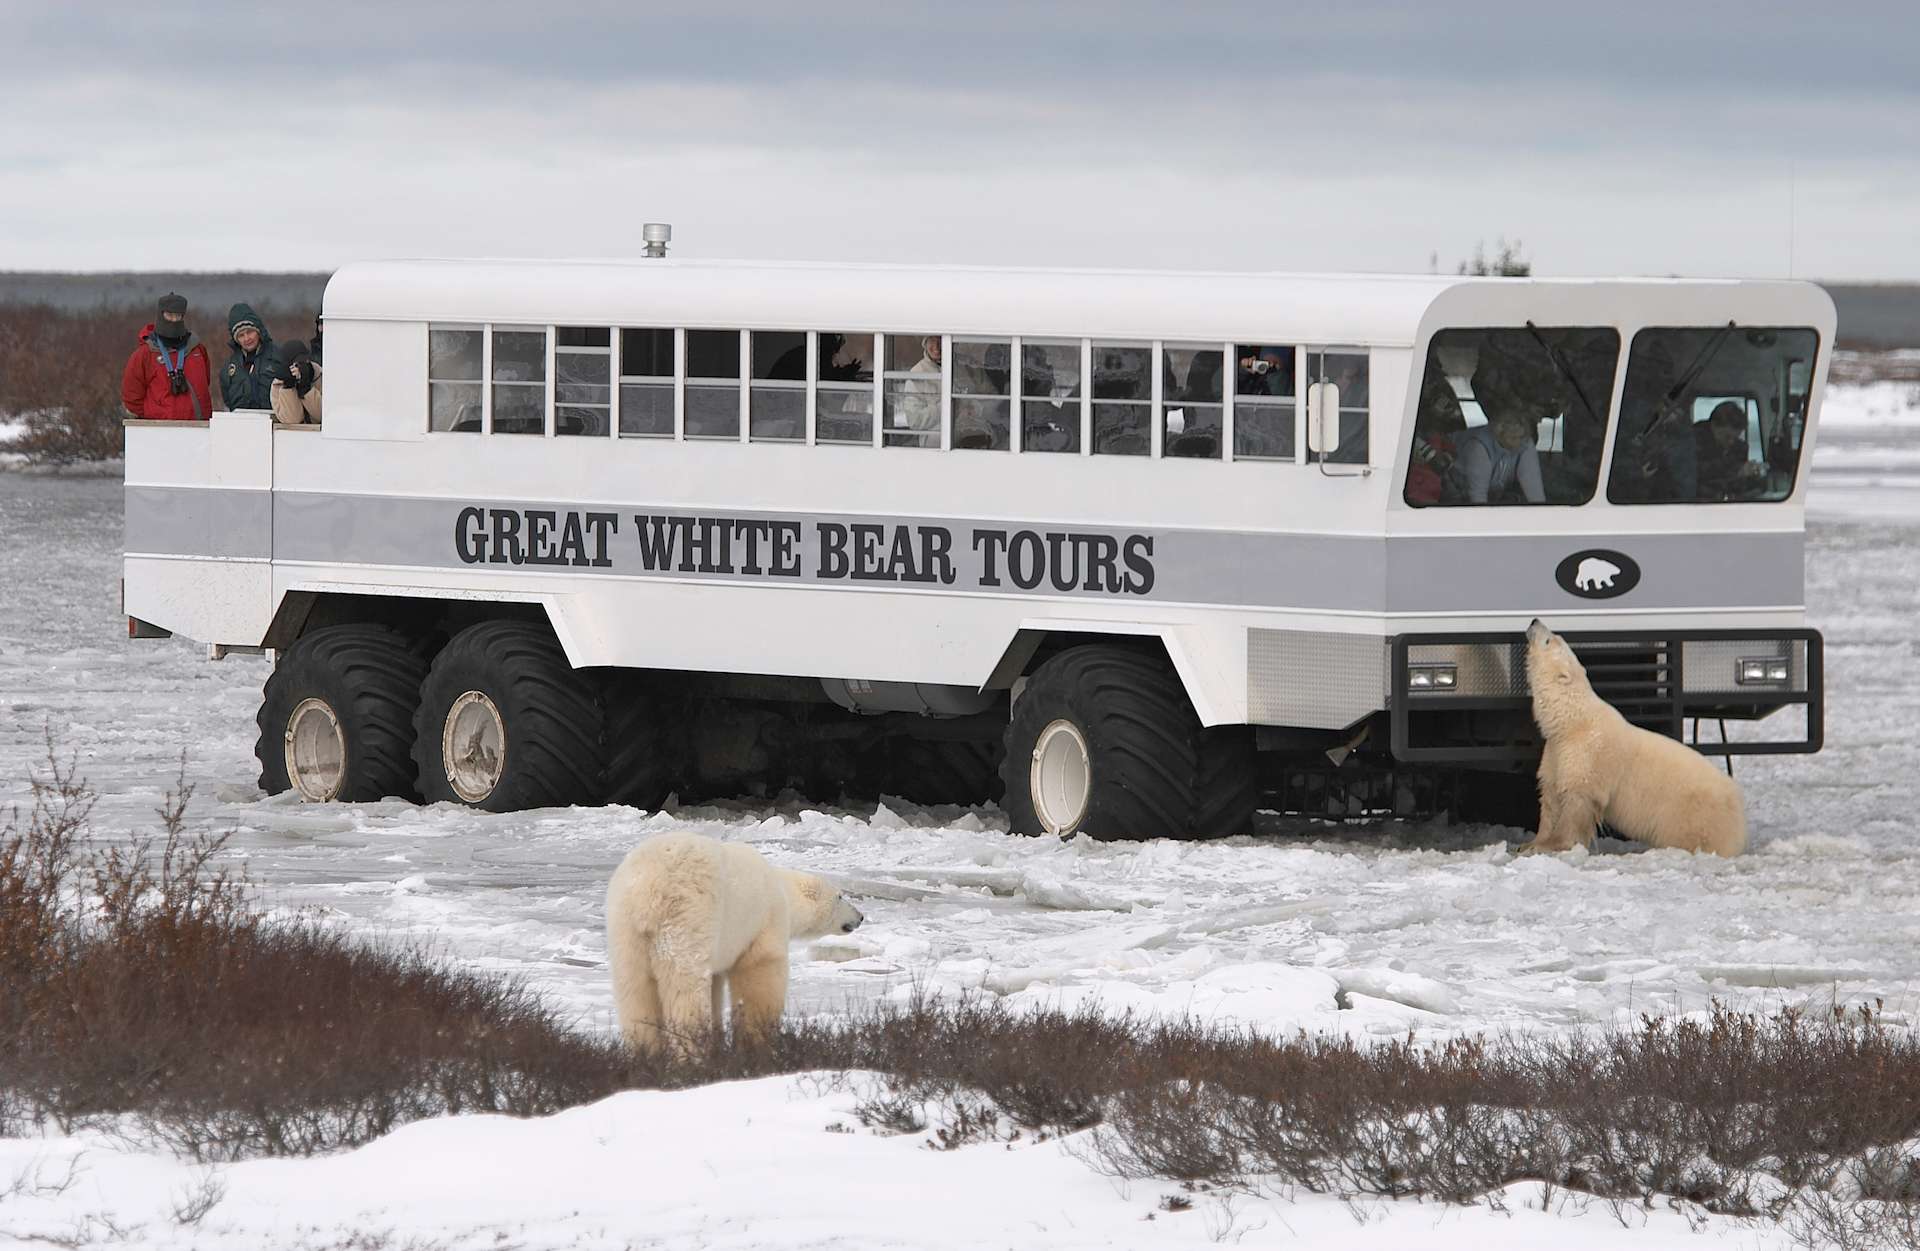 Two polar bears investigate a Great White Bears Polar Rover on the snowy tundra in Churchill, Manitoba, Canada